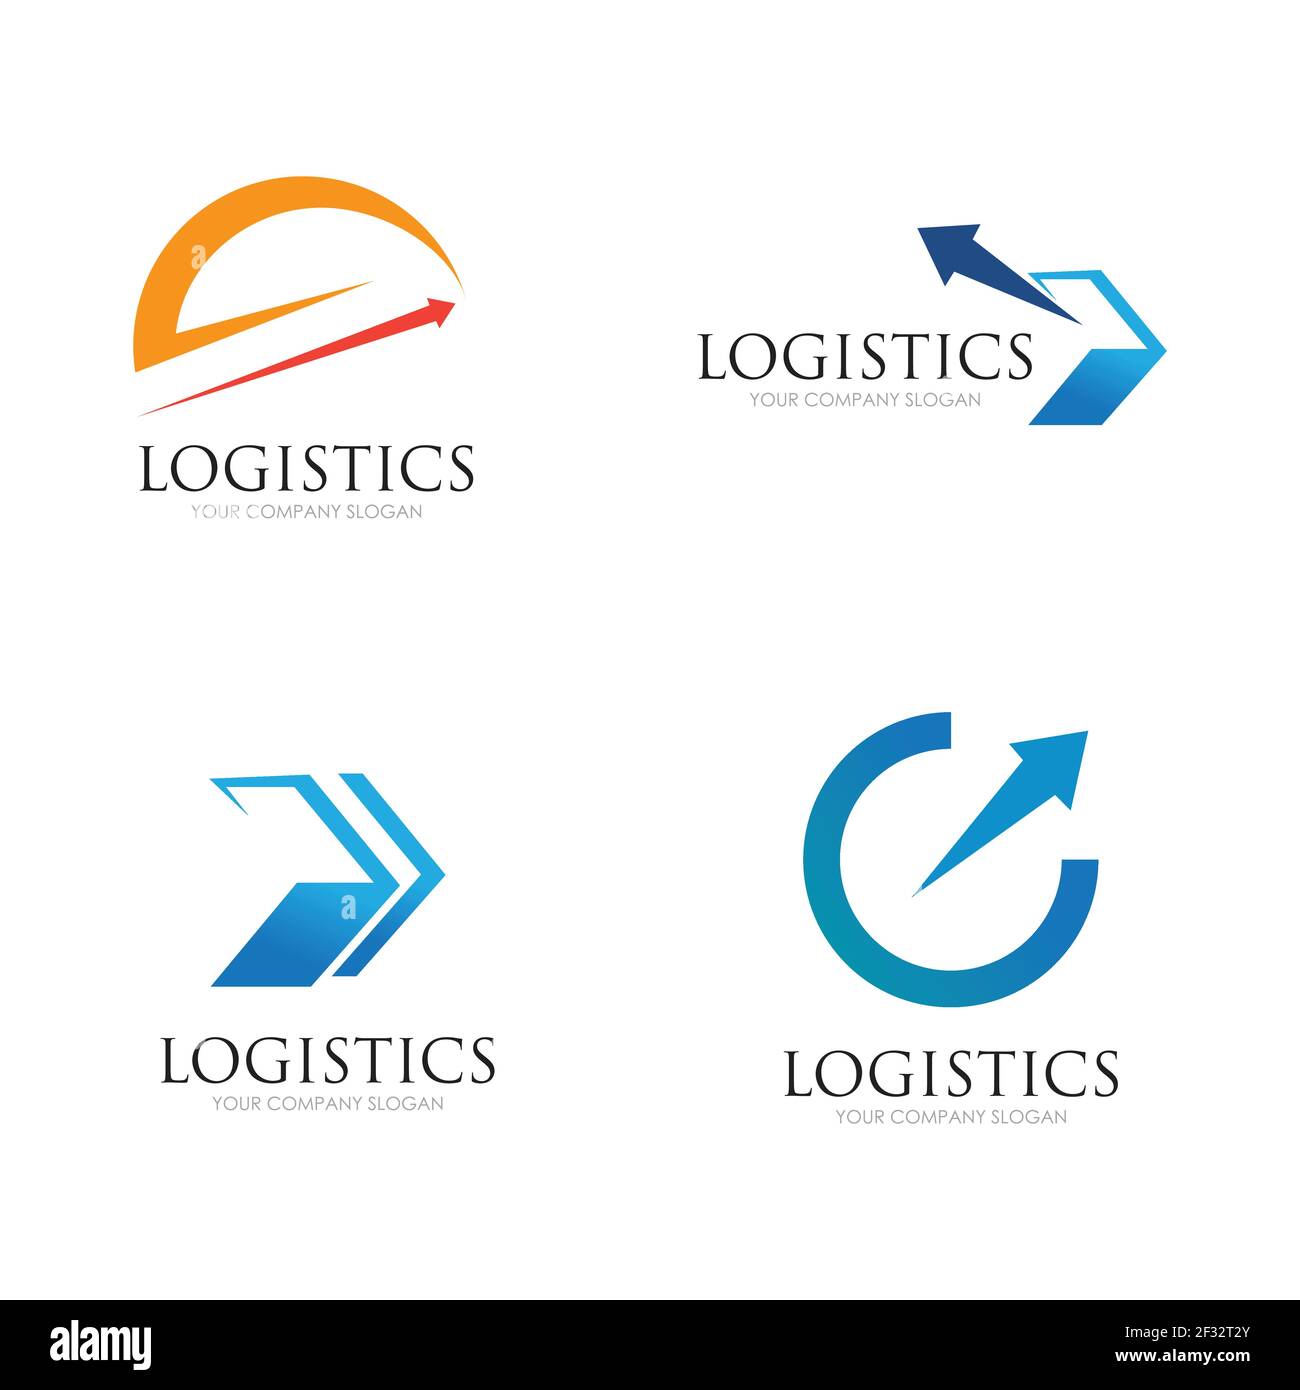 Premium Vector  Logistic delivery, truck express fast shipping logo design  template